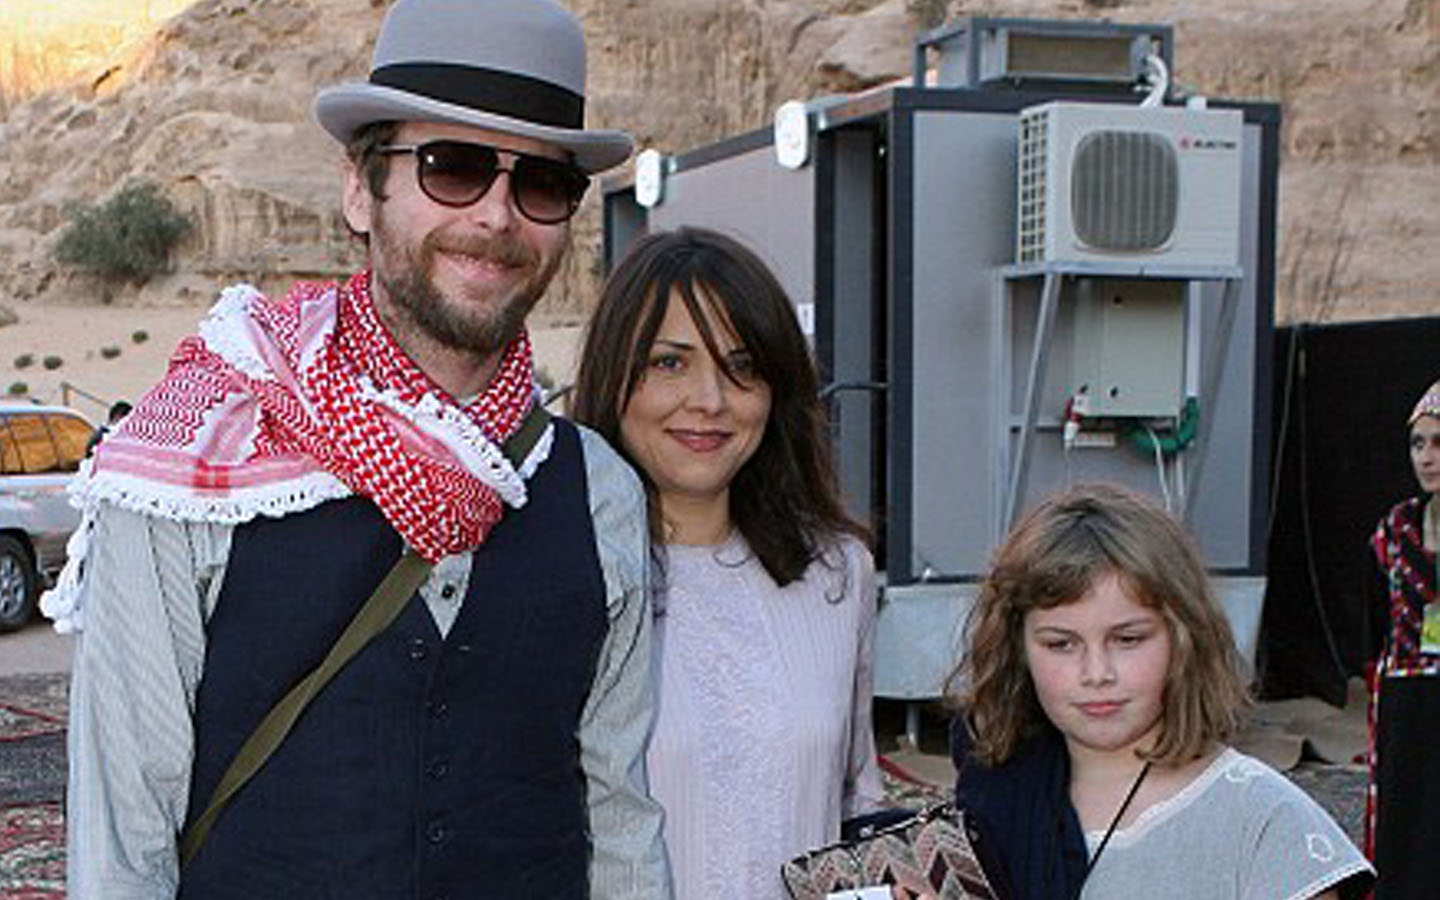 Jovanotti with his wife and daughter